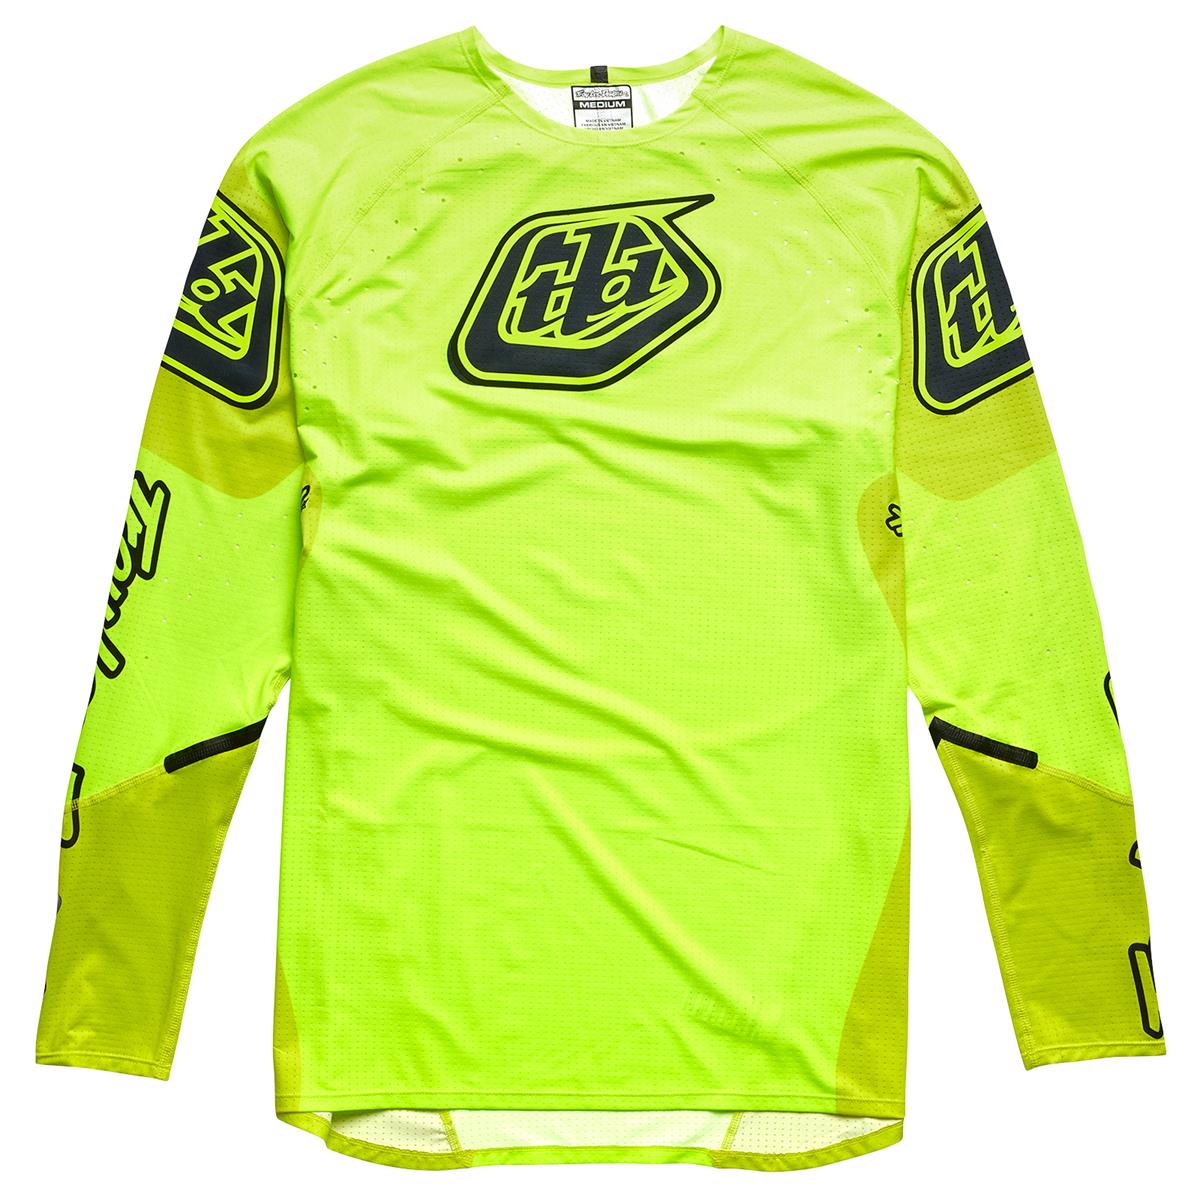 Troy Lee Designs Maillot VTT manches longues Sprint Ultra Sequence - Neon Jaune